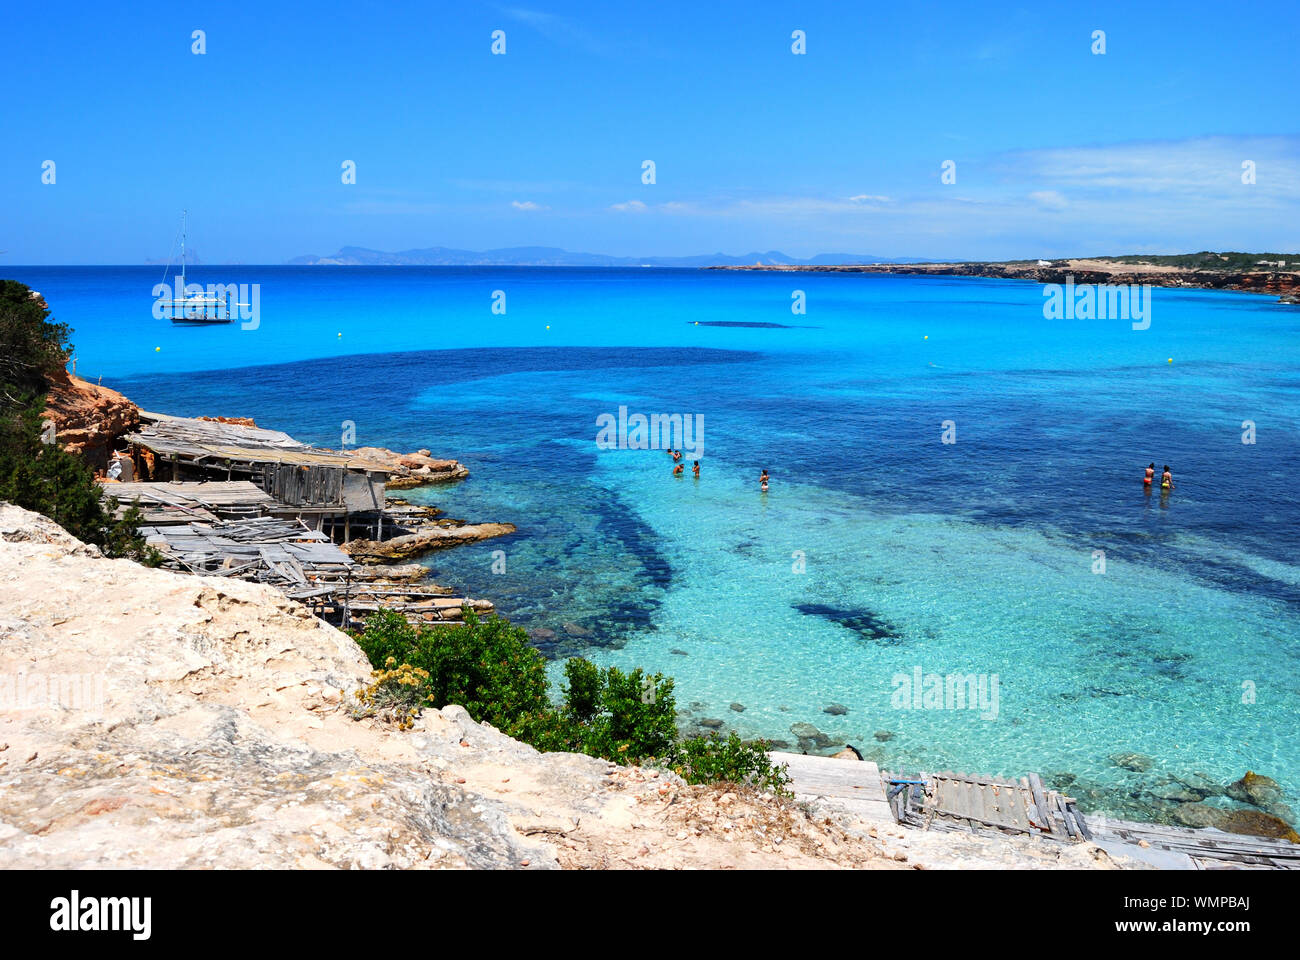 Scenic View Of Blue Sea Against Sky At Formentera Island Stock Photo